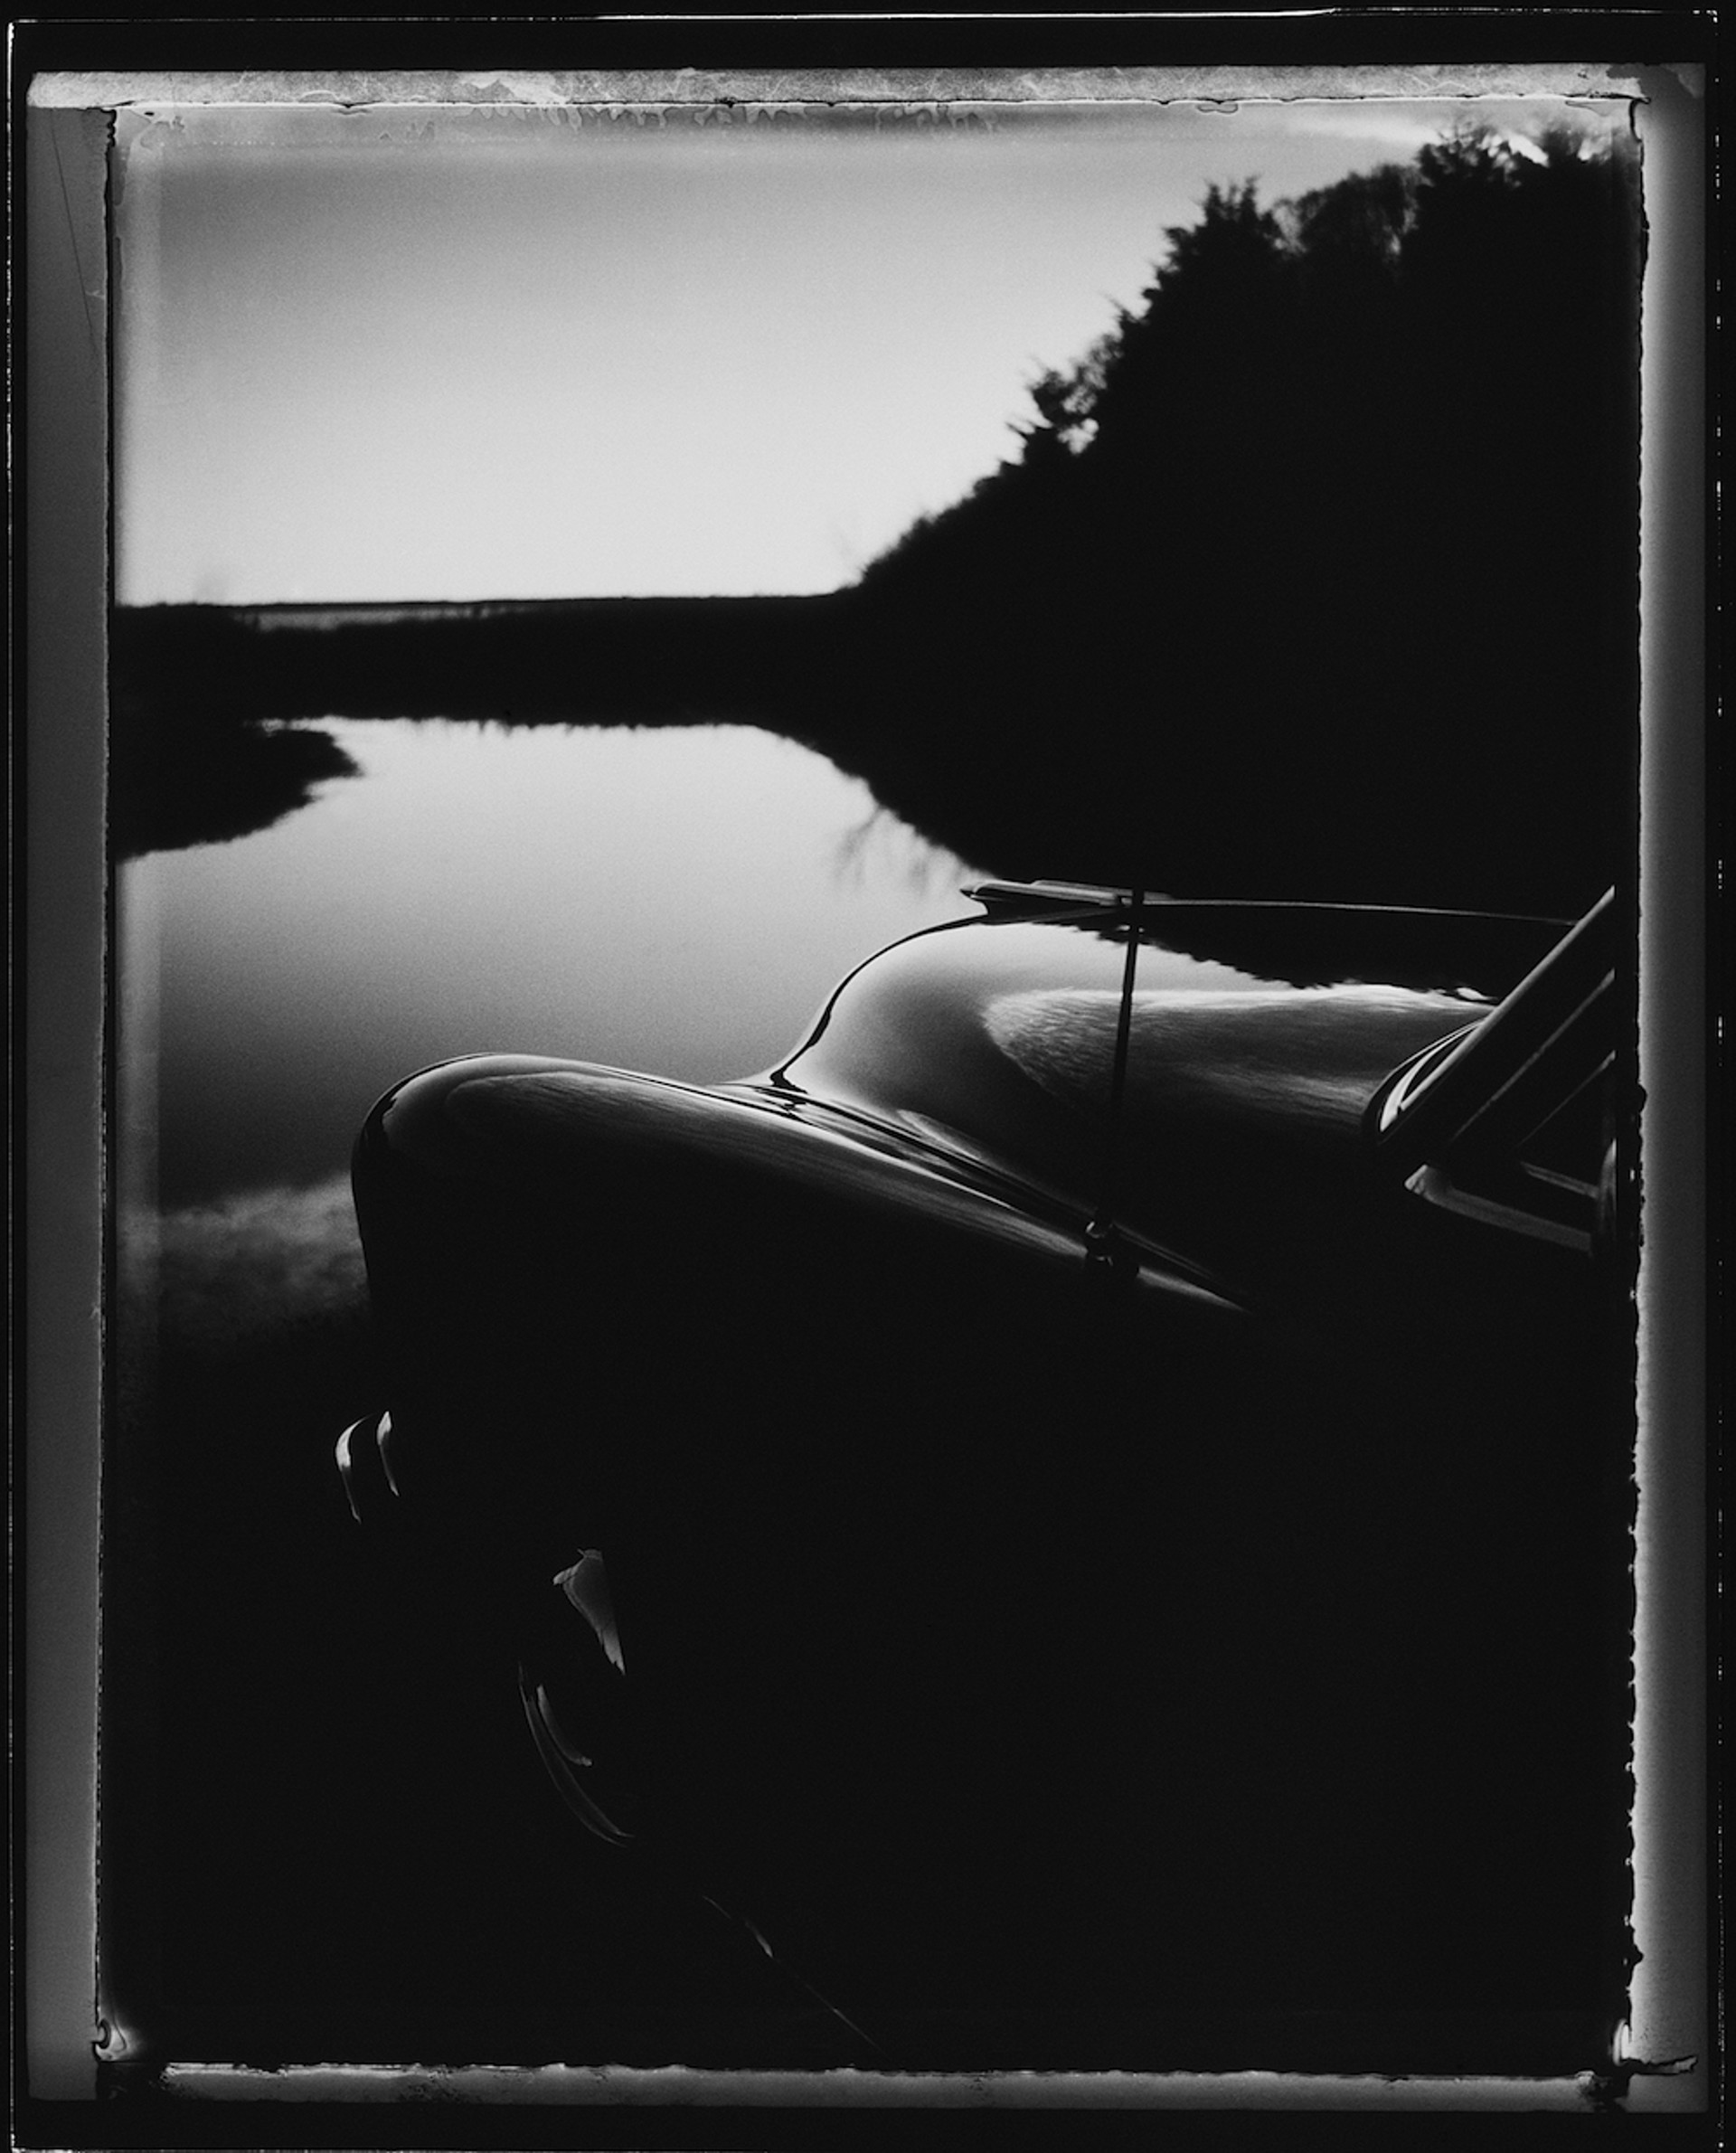 Cars #12 BW by Timothy White